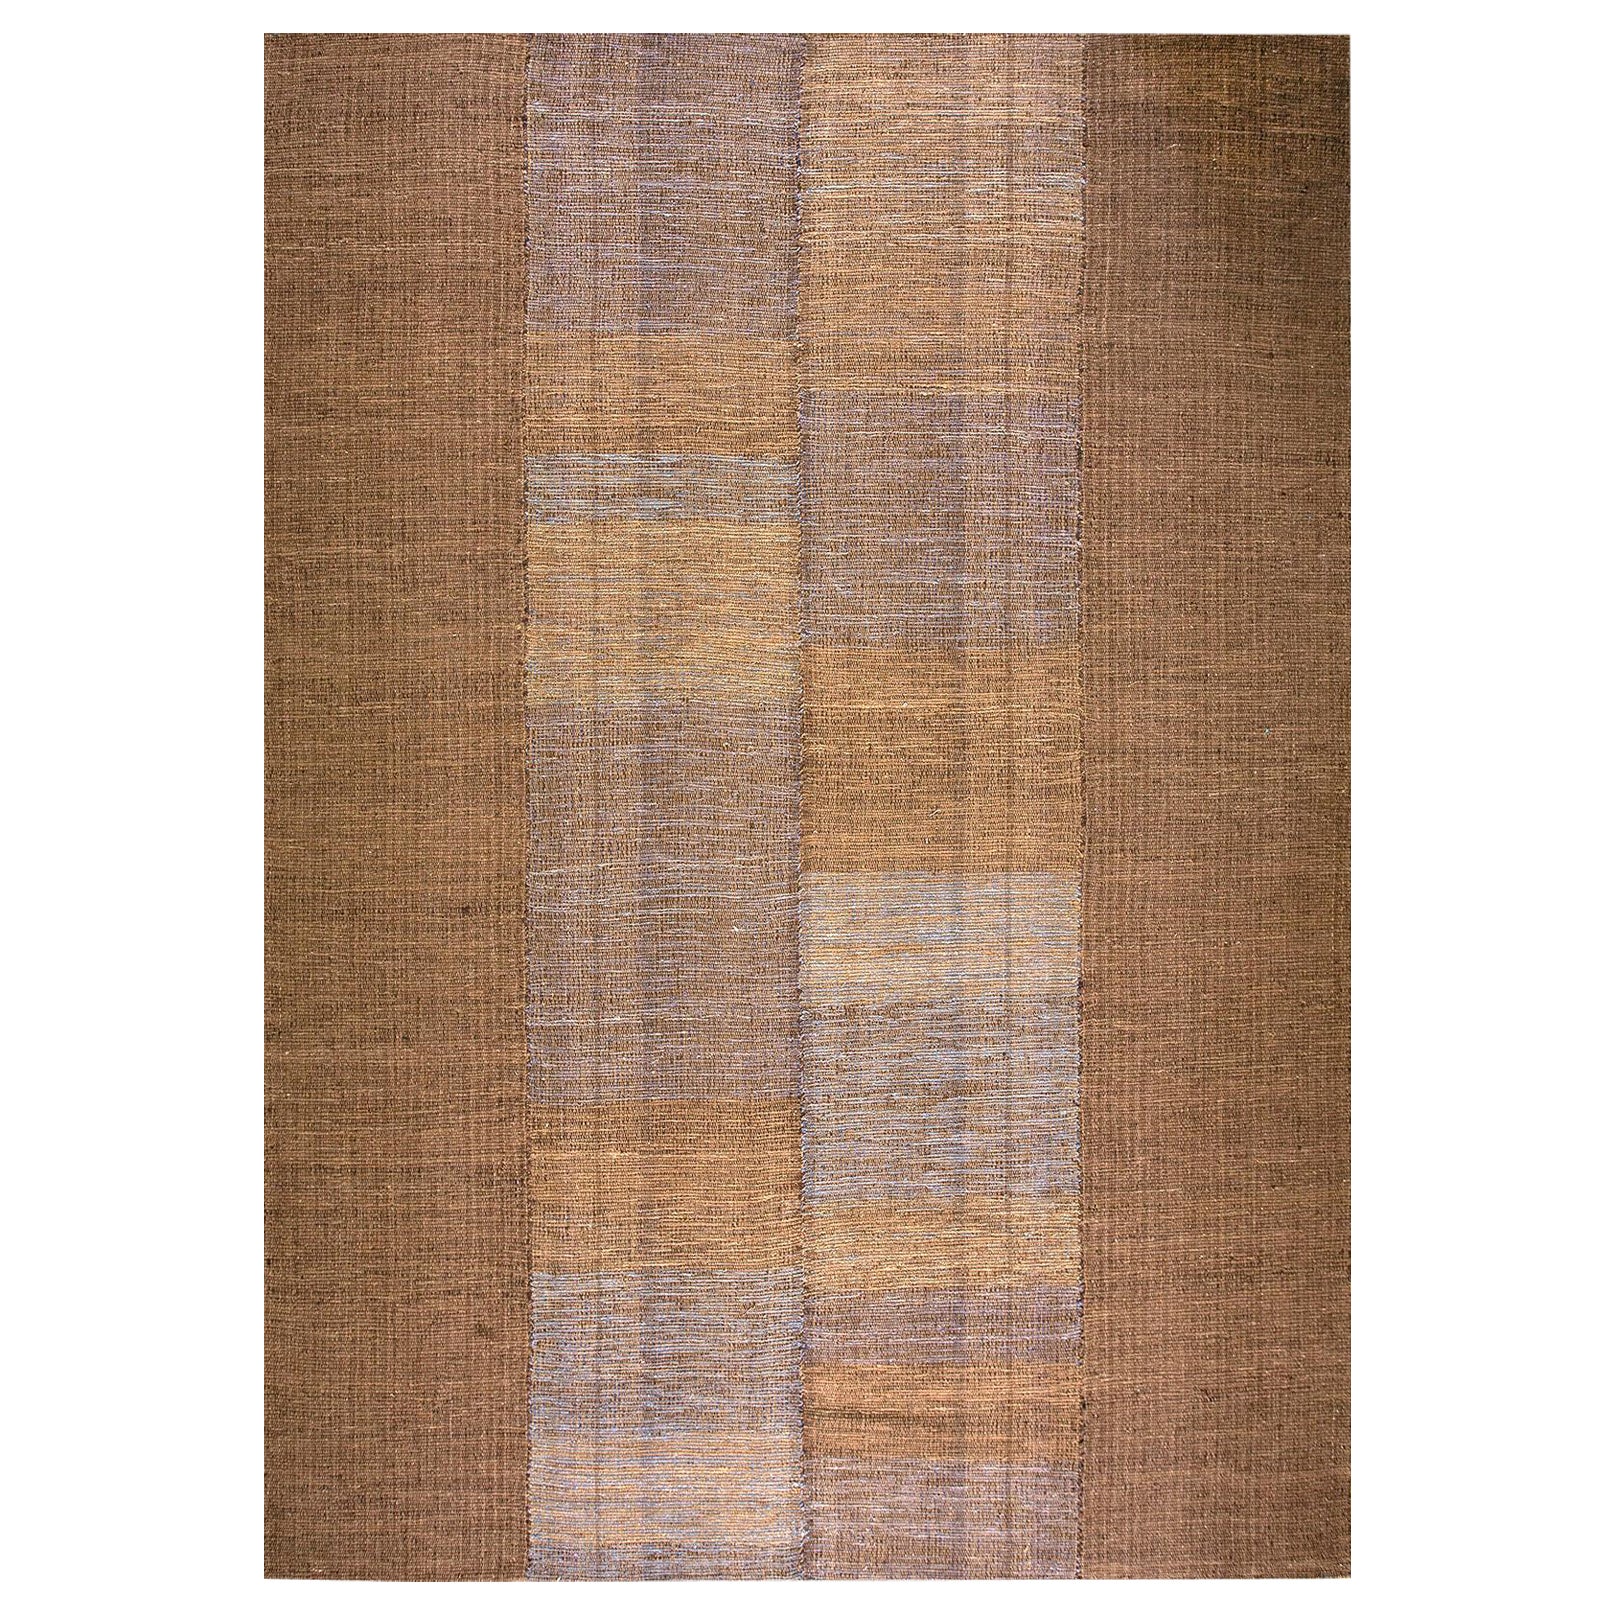 Contemporary Handwoven Wool Shaker Style Flat Weave Carpet (10' 3"X14'-312x427)